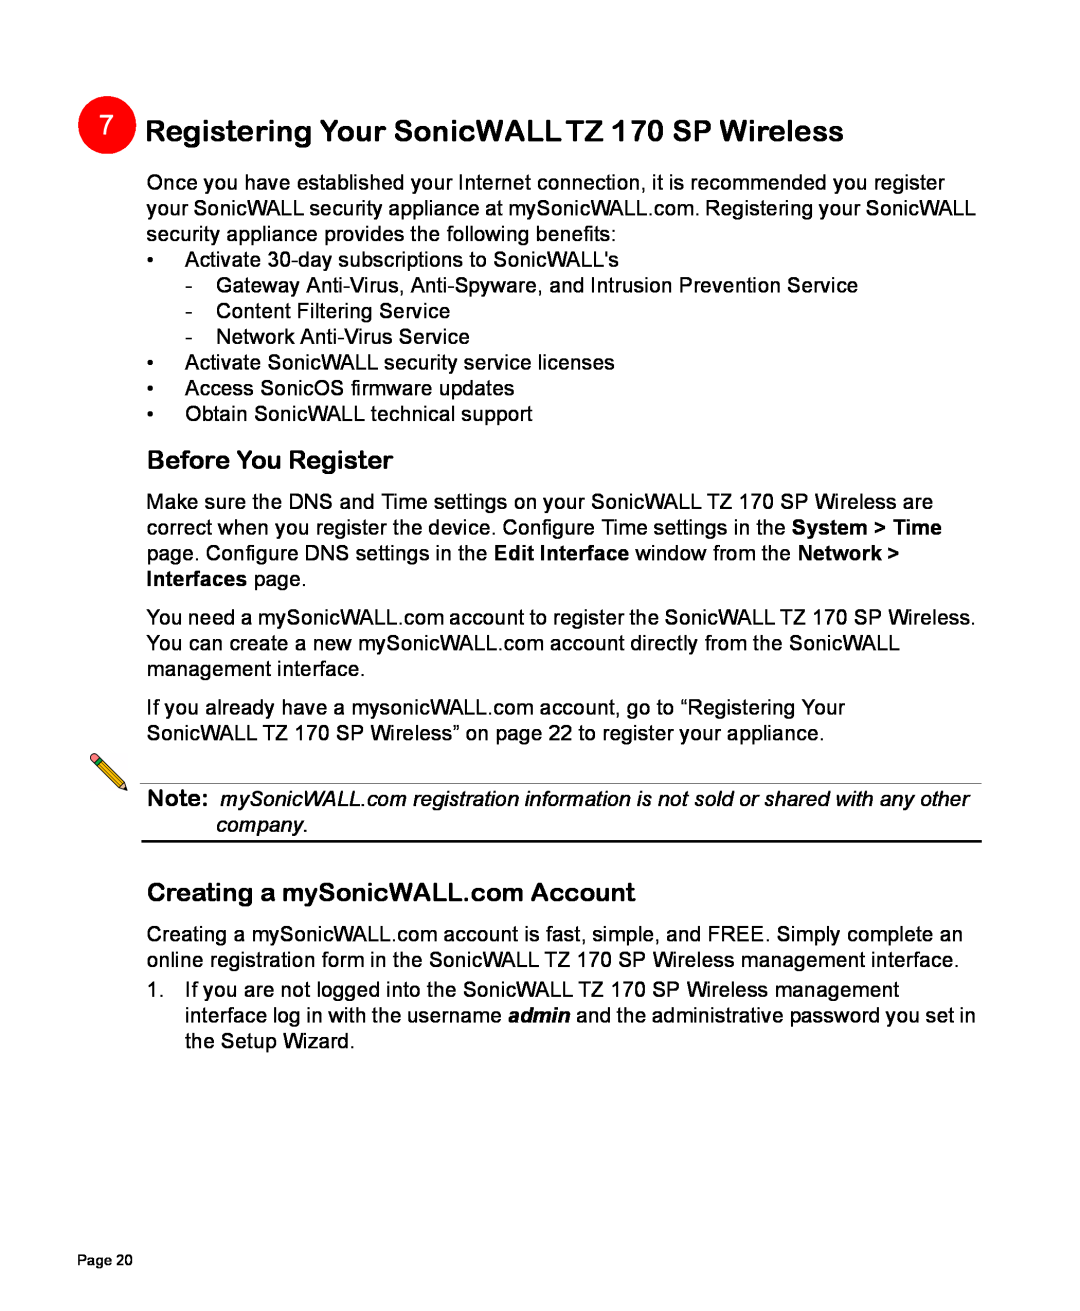 SonicWALL manual Registering Your SonicWALL TZ 170 SP Wireless, Before You Register 